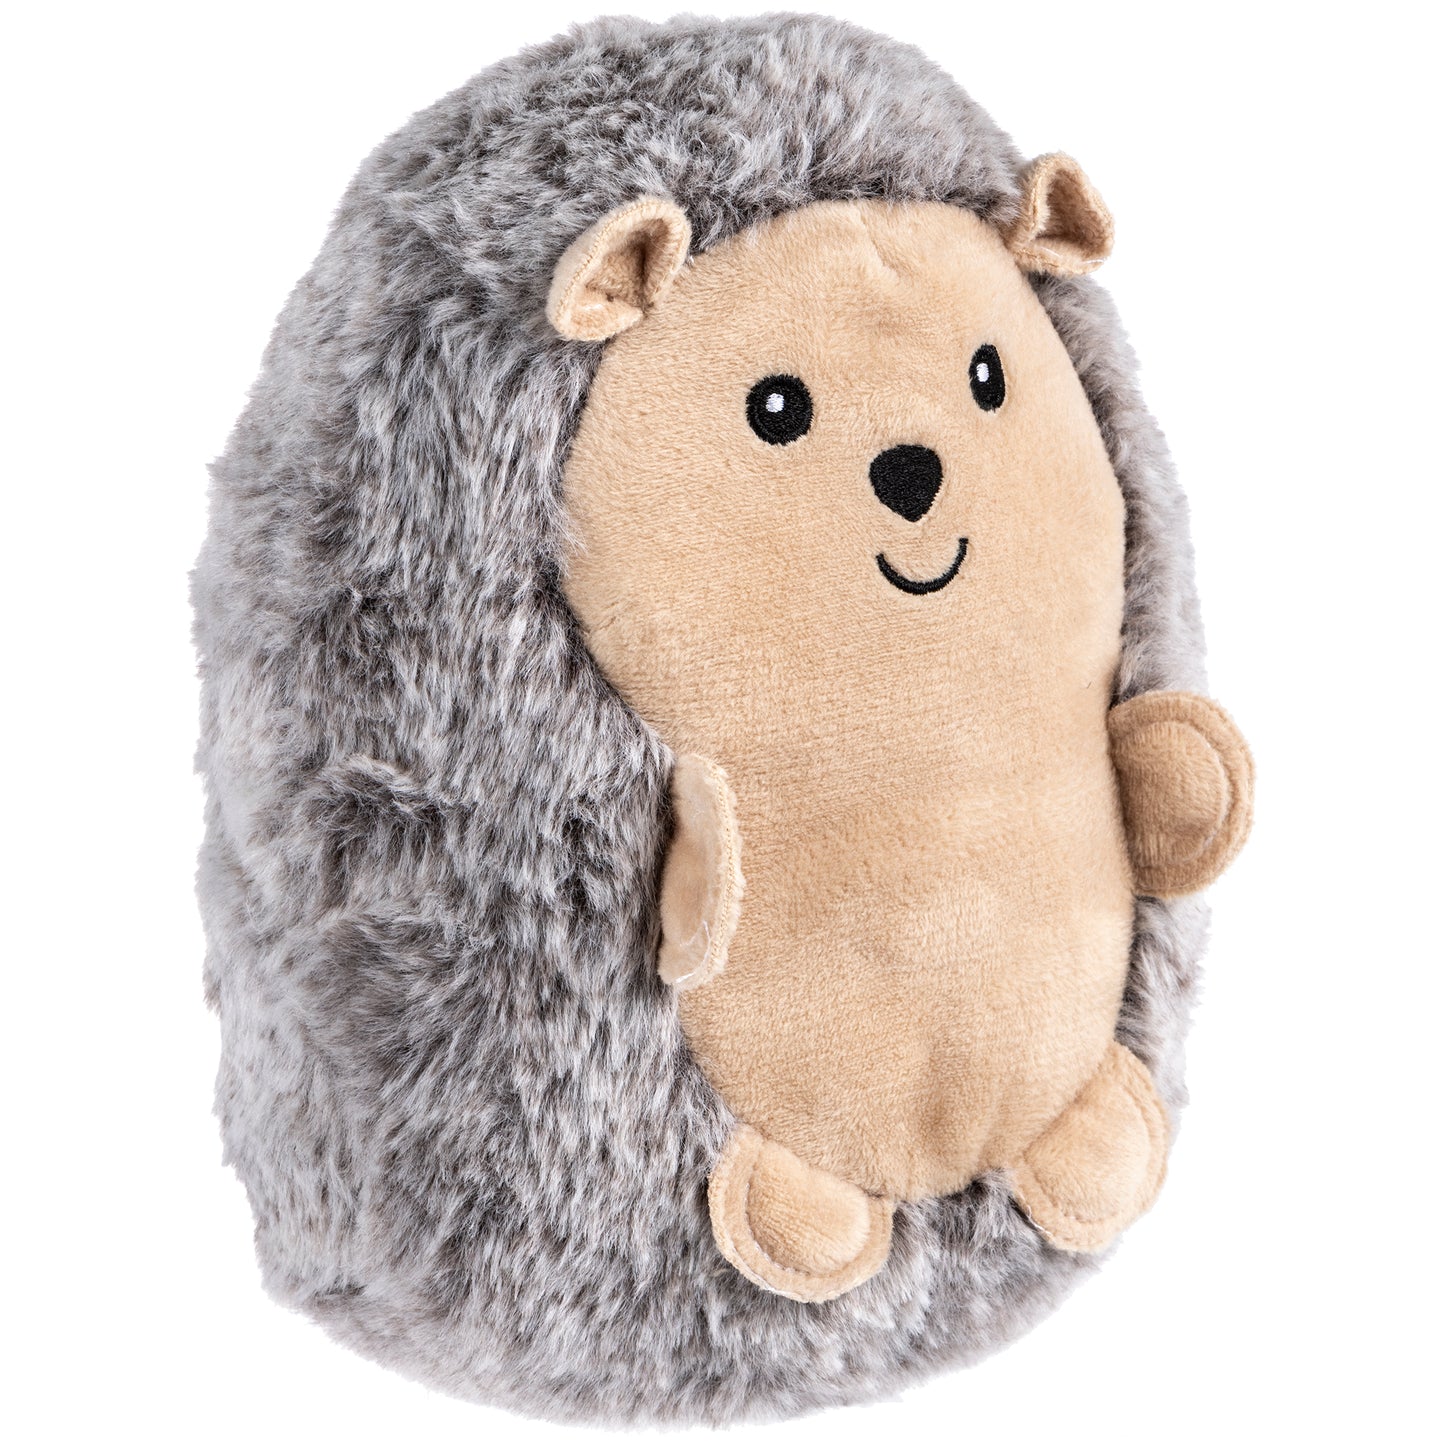 Hedgehog plush toy is made of soft plush with a beige back, whisper white belly and face, pale peach blush feet and ears, and an iron gray embroidered face.